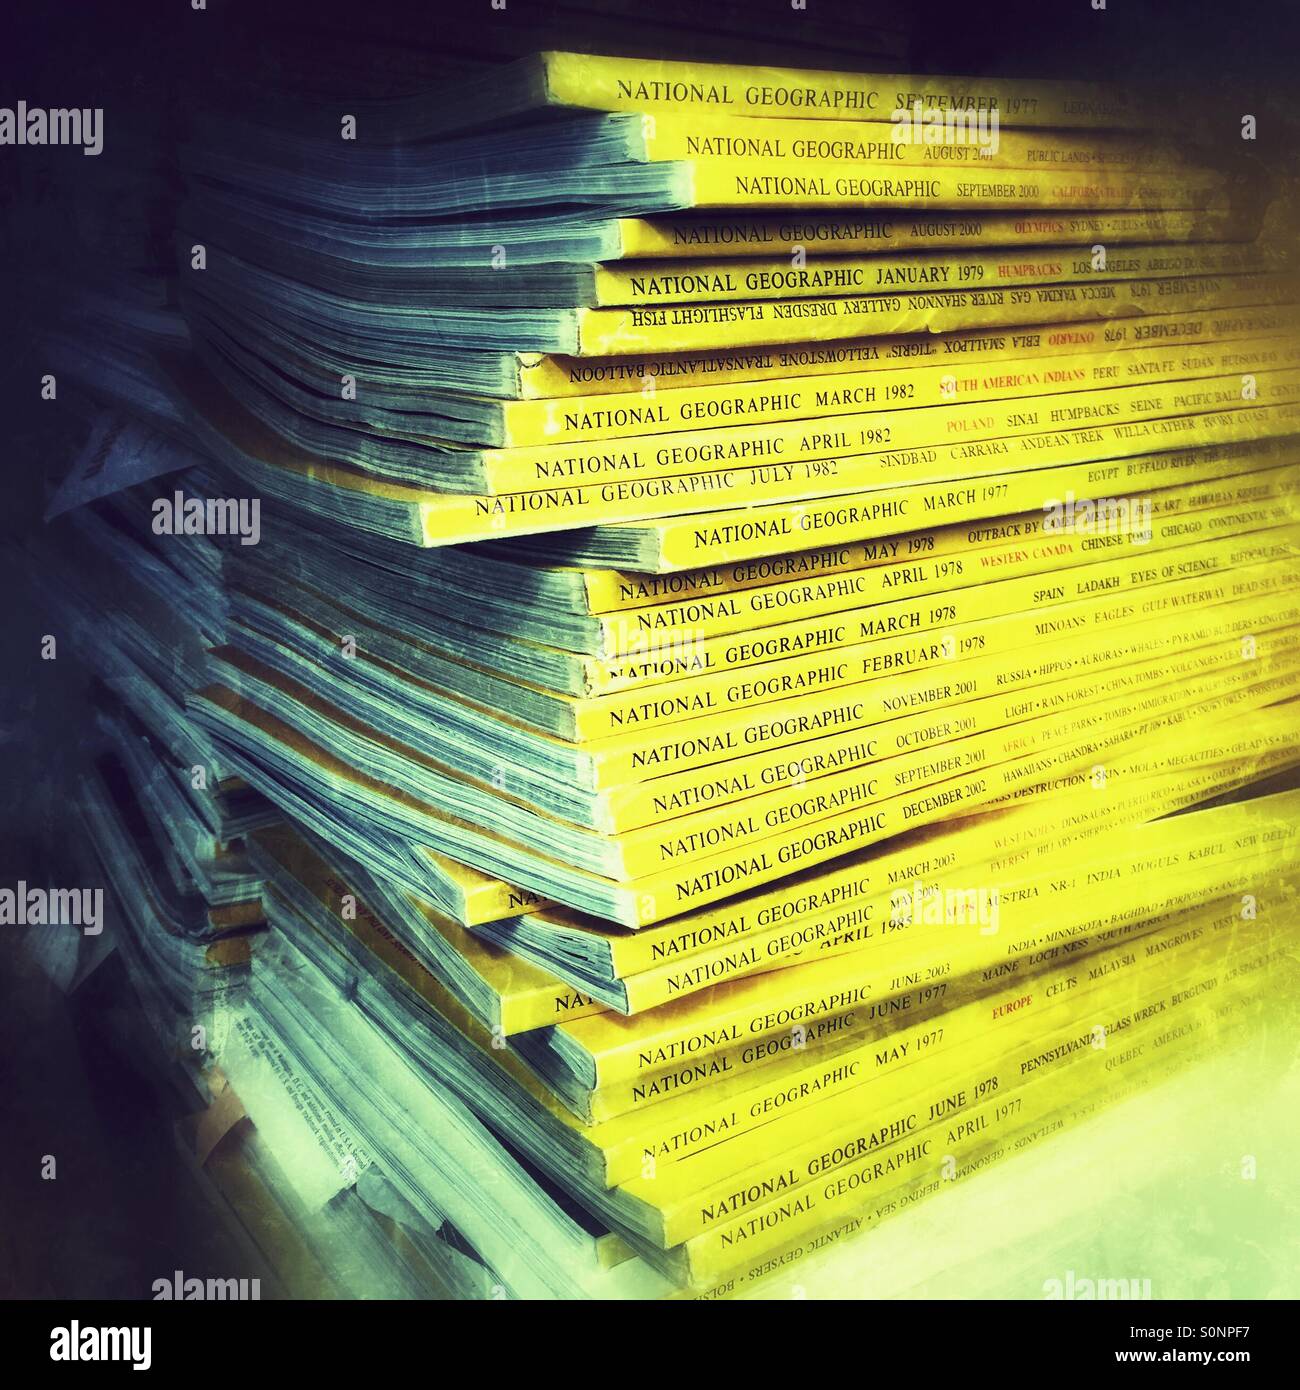 Stack of old issues of National Geographic magazine Stock Photo - Alamy